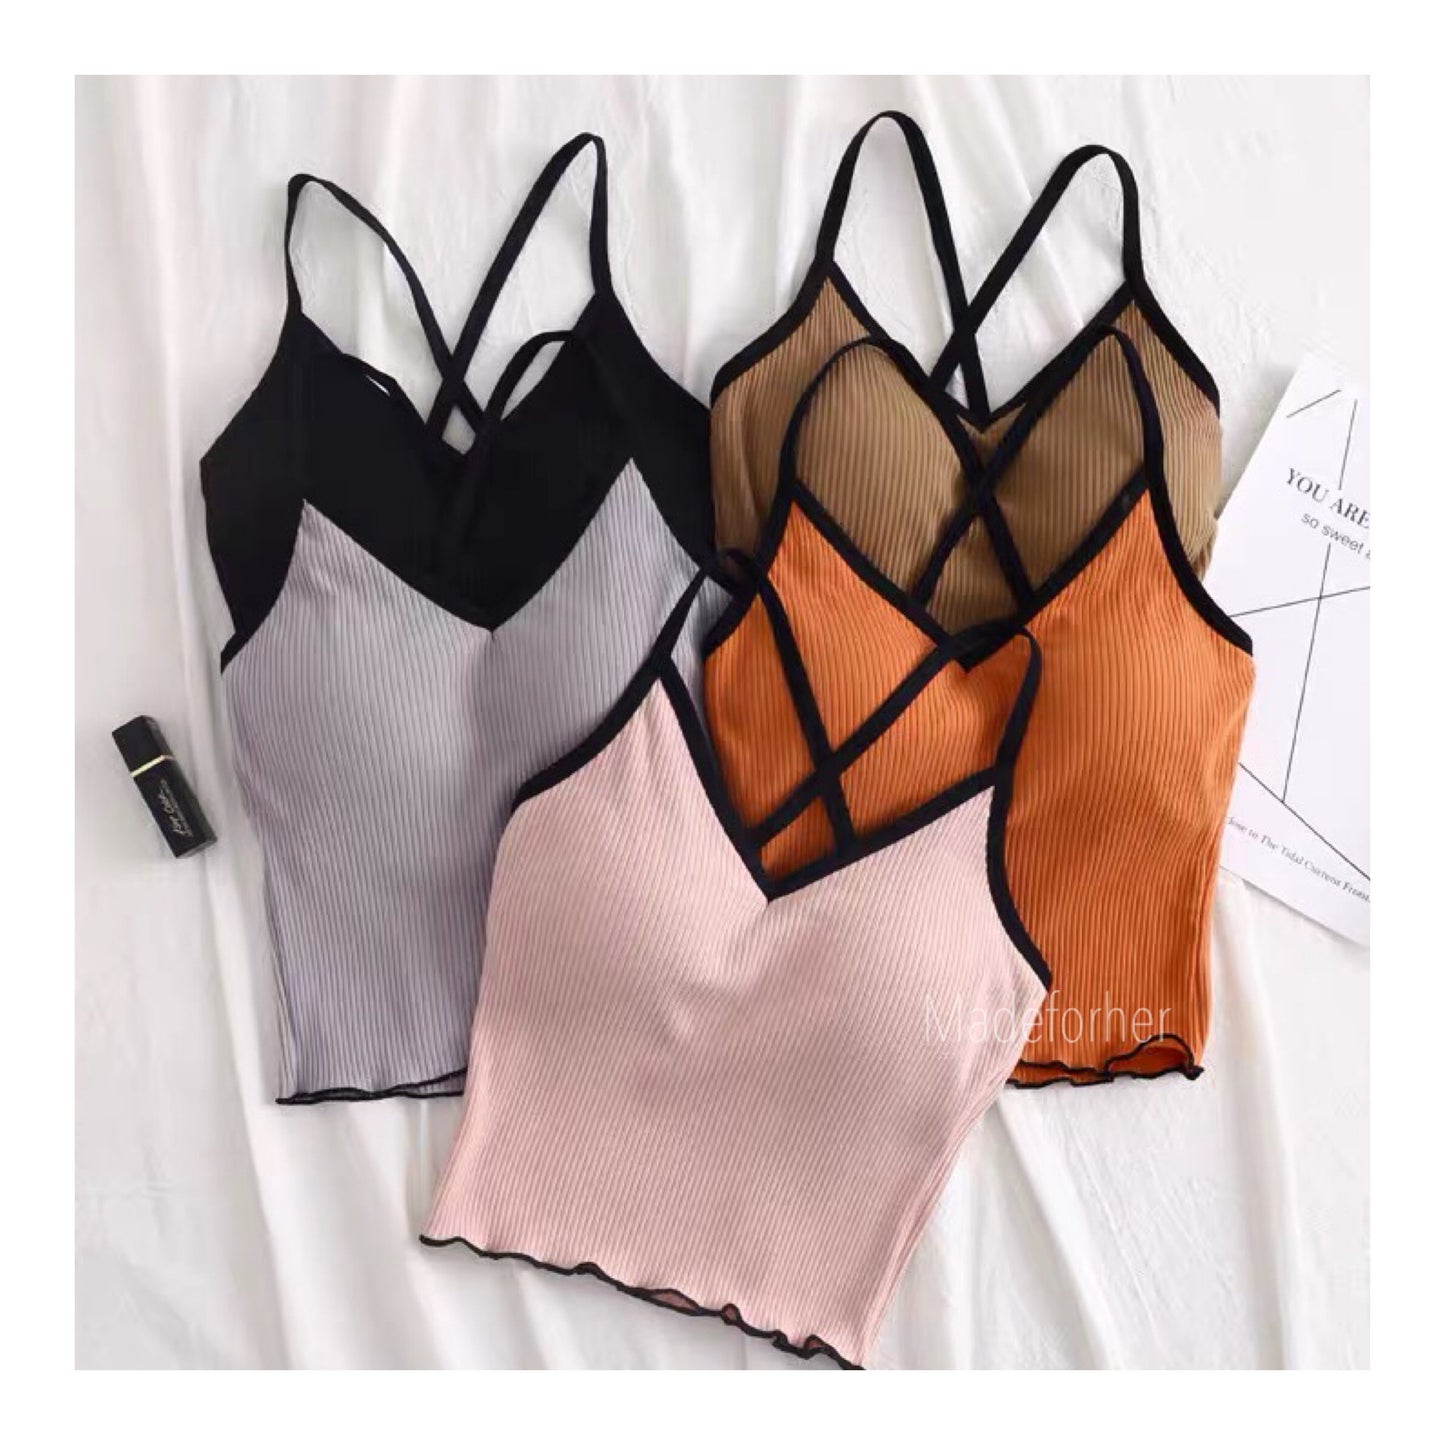 Criss Cross Cami Bralette Top – Made For Her Label